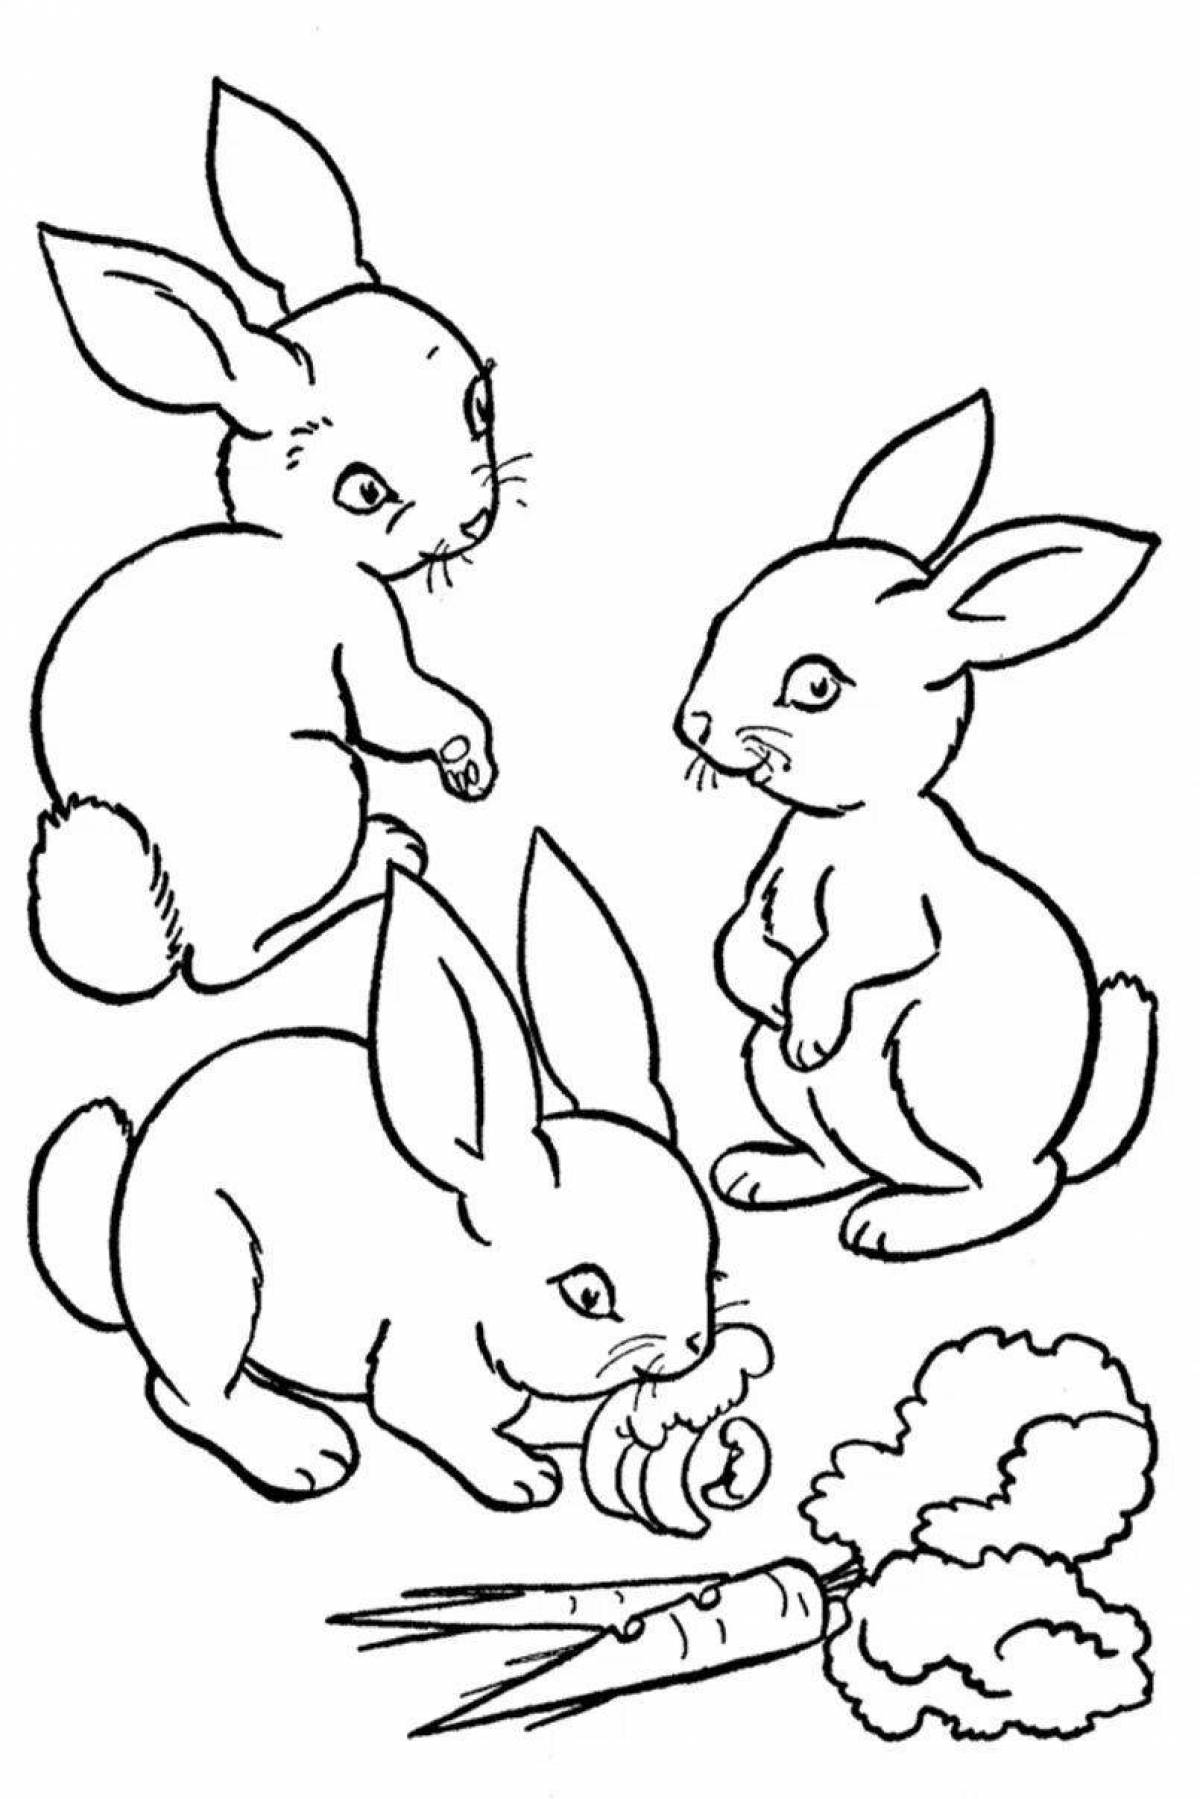 Children's excited bunny coloring book